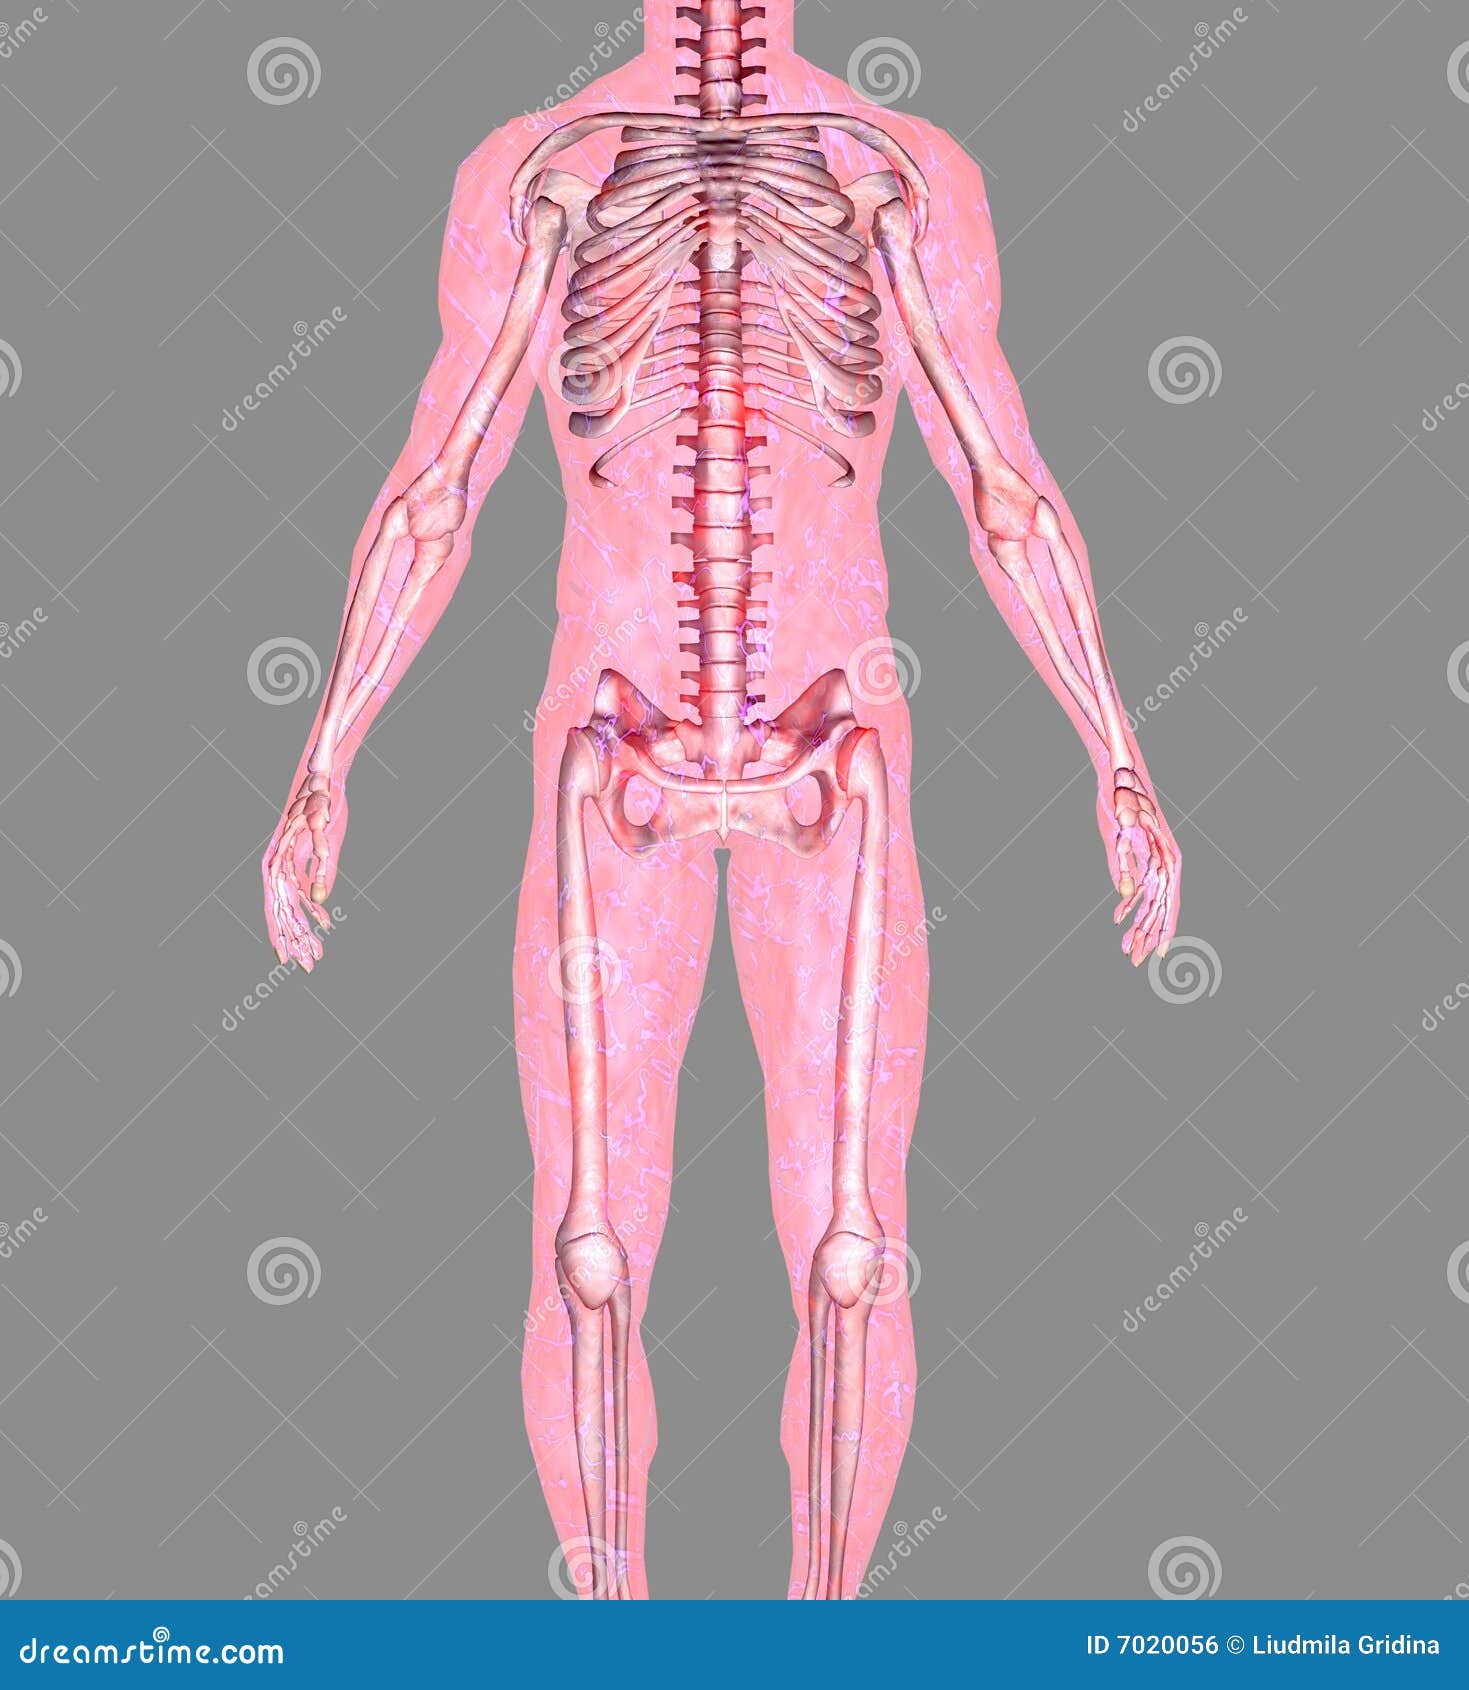 Anatomy Picture. Image: 7020056